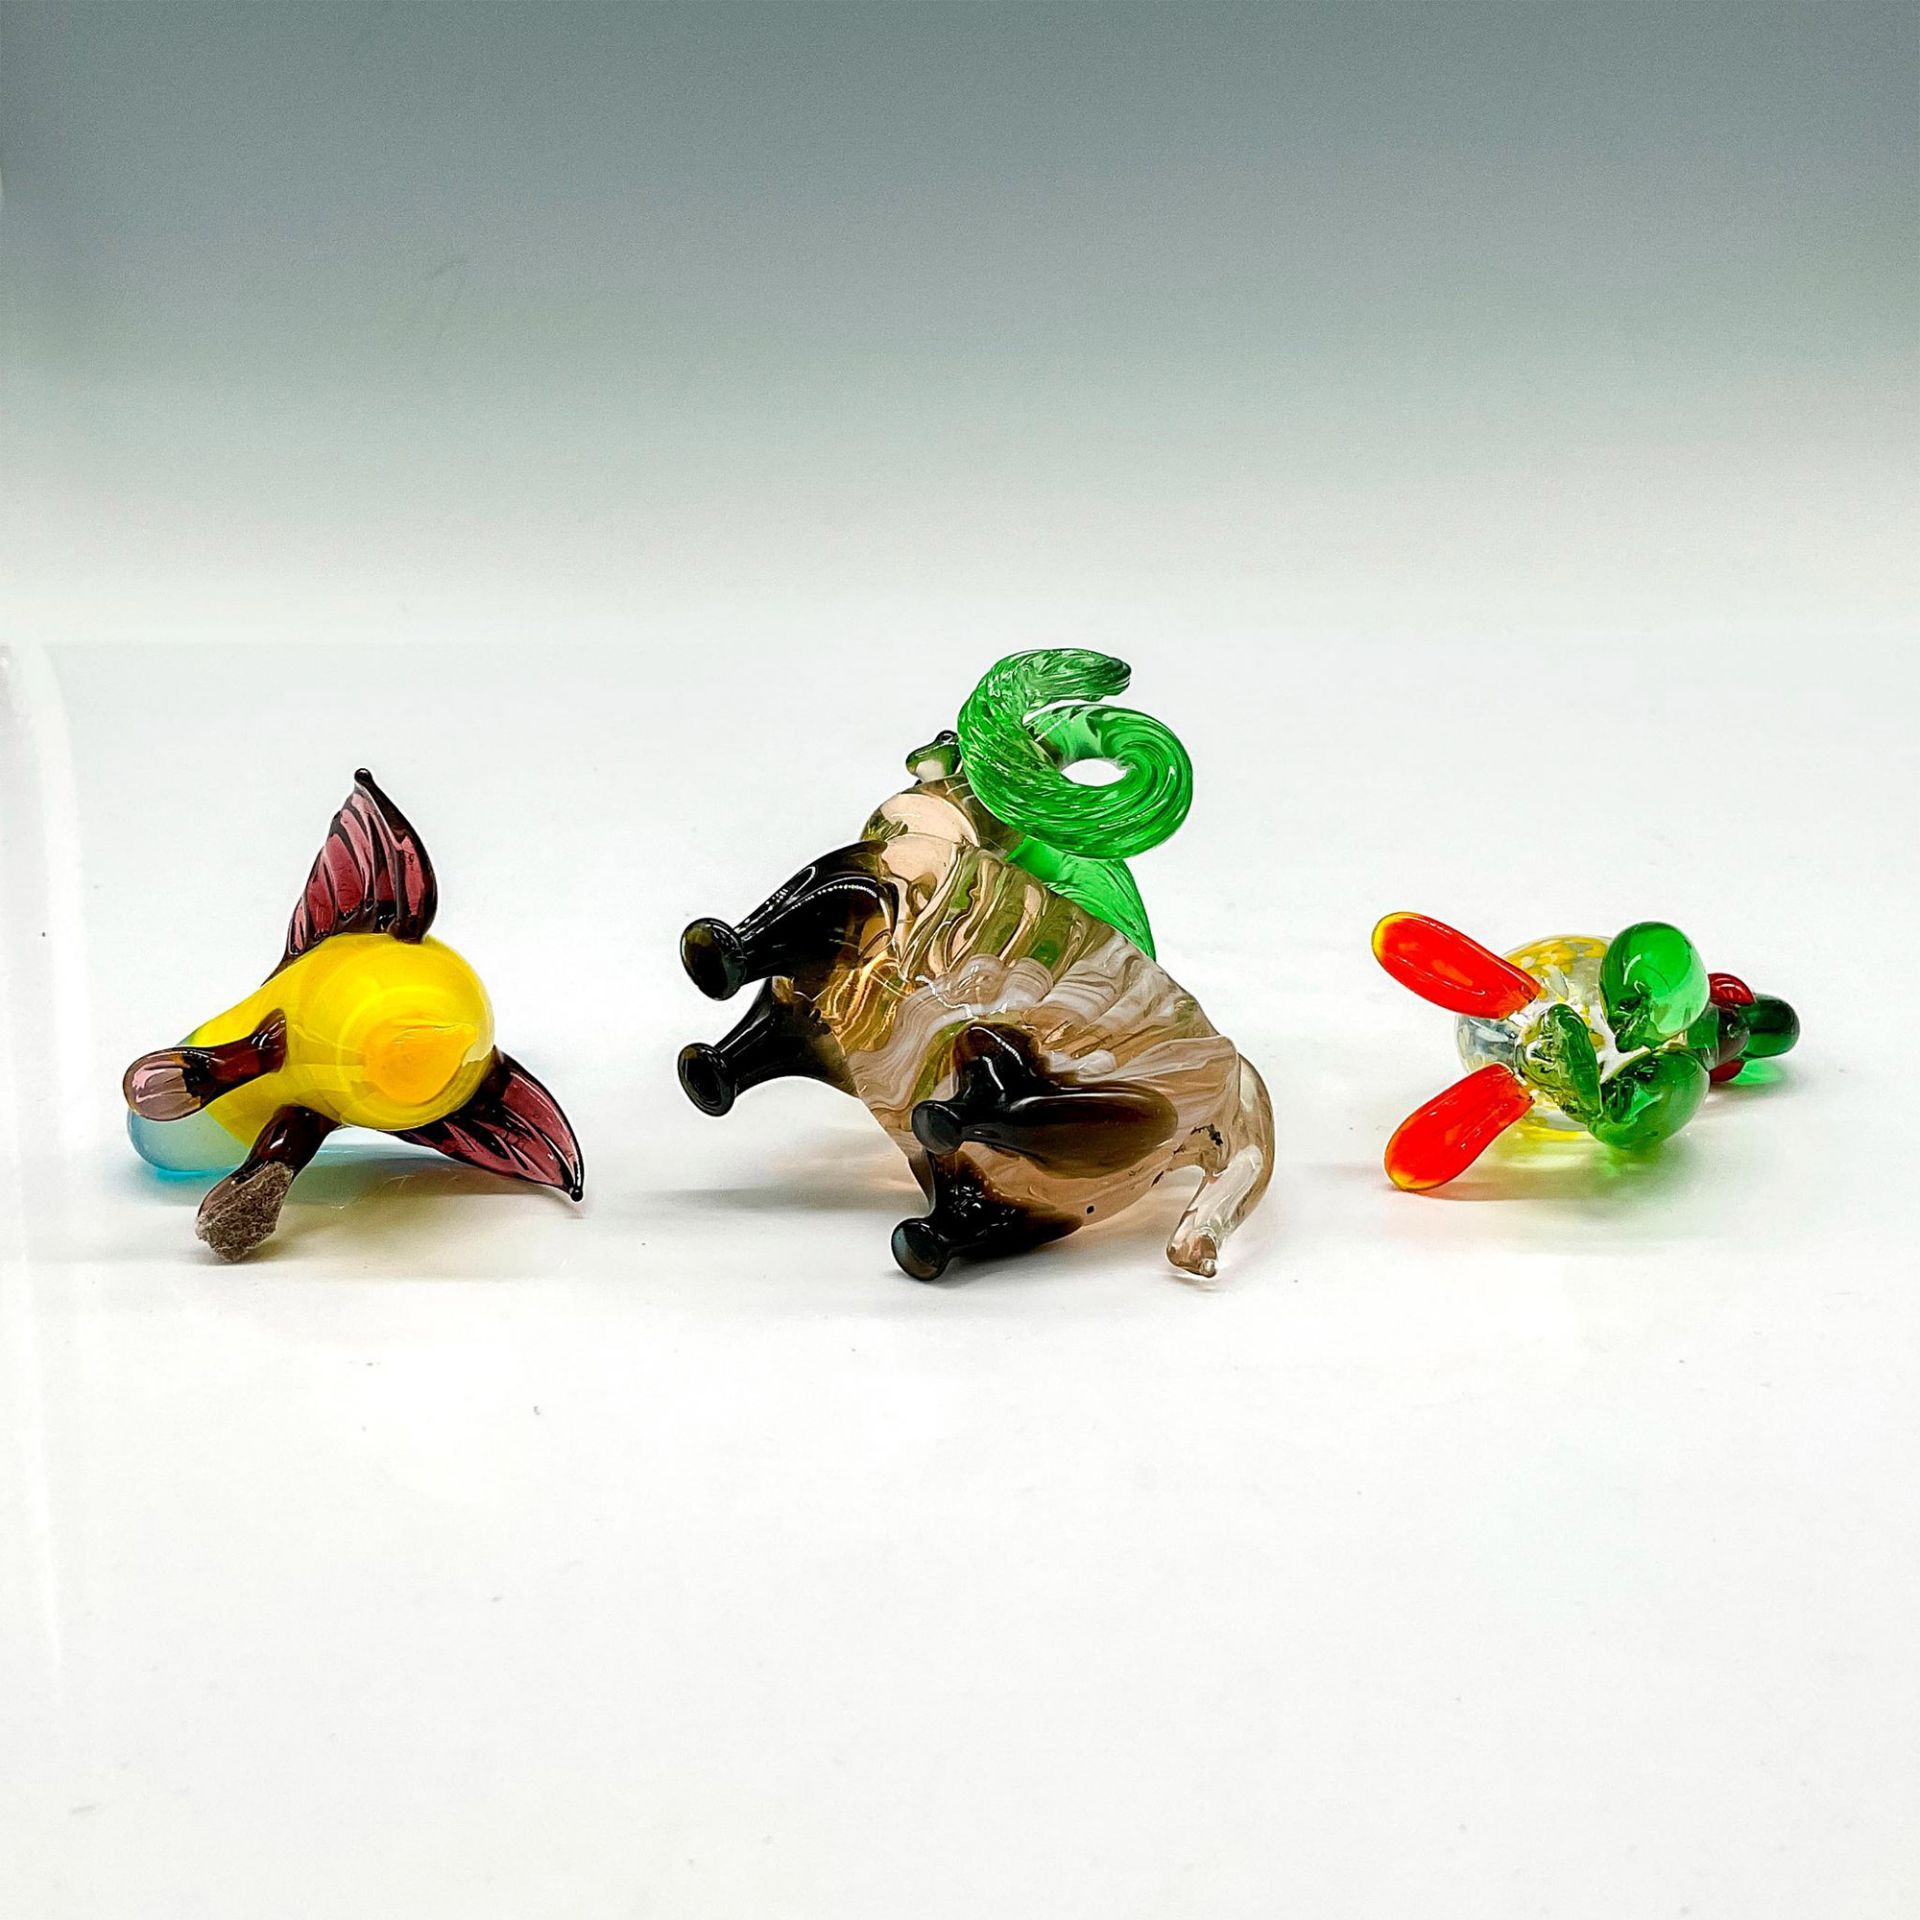 3pc Hand-blown Art Glass Figurines - Image 3 of 3